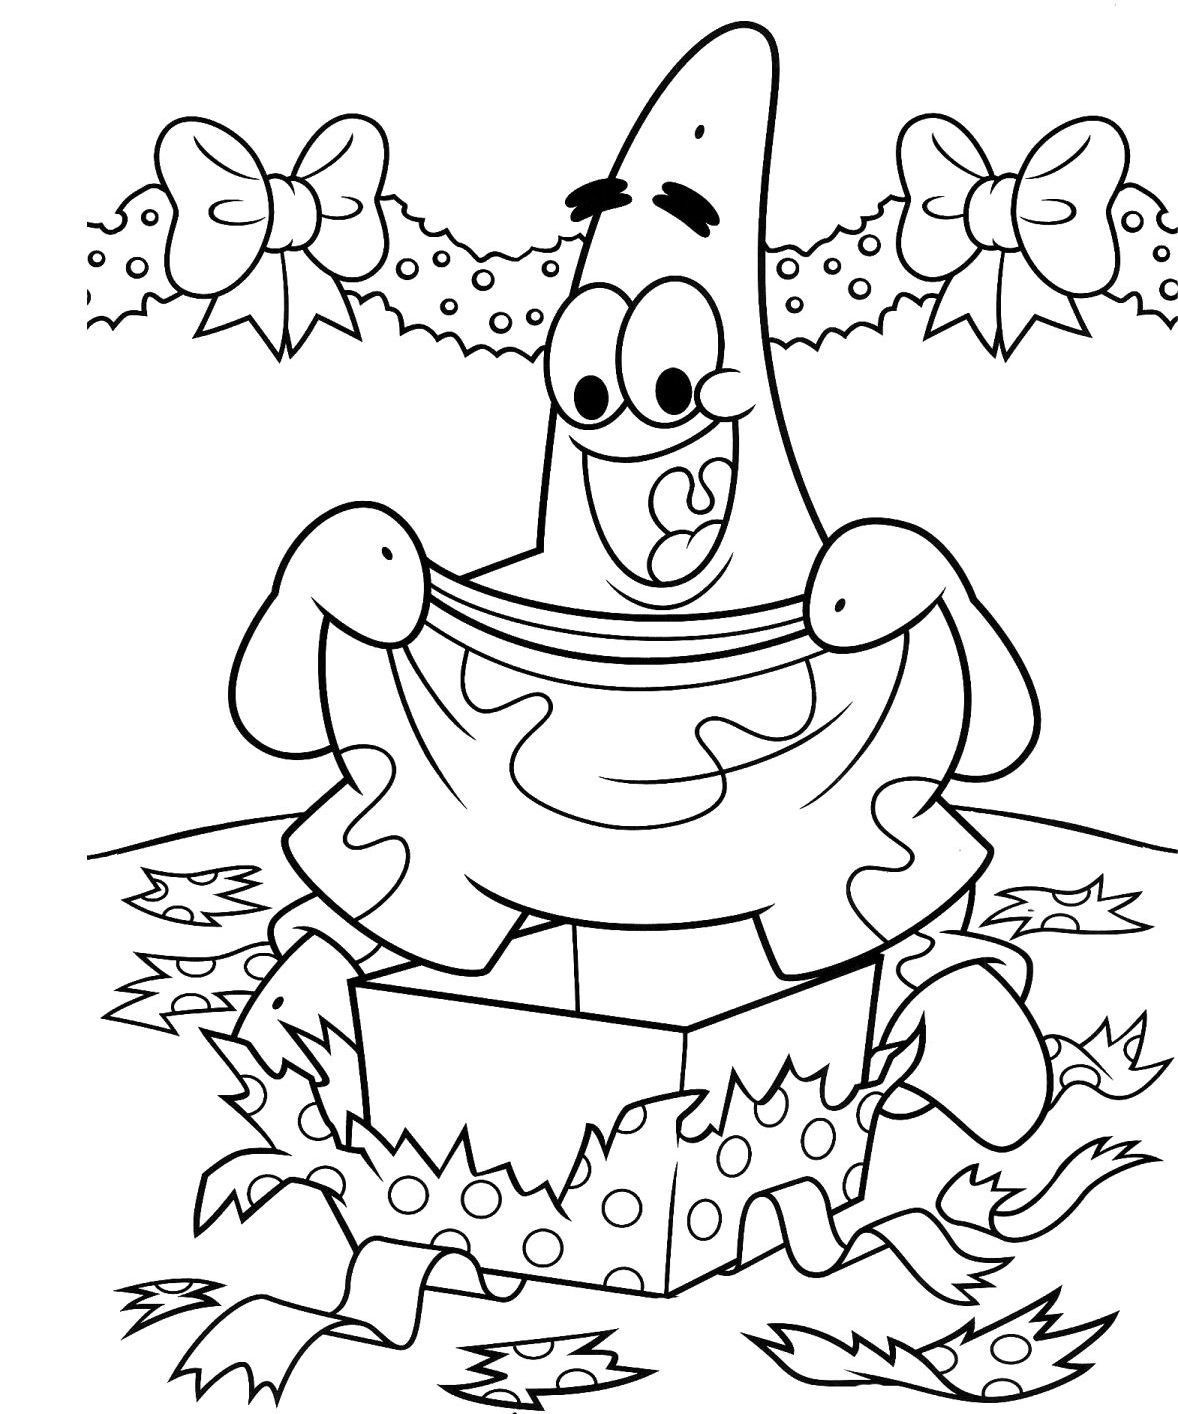 Printable Holiday Coloring Pages
 Spongebob Christmas Coloring Pages Free Printable